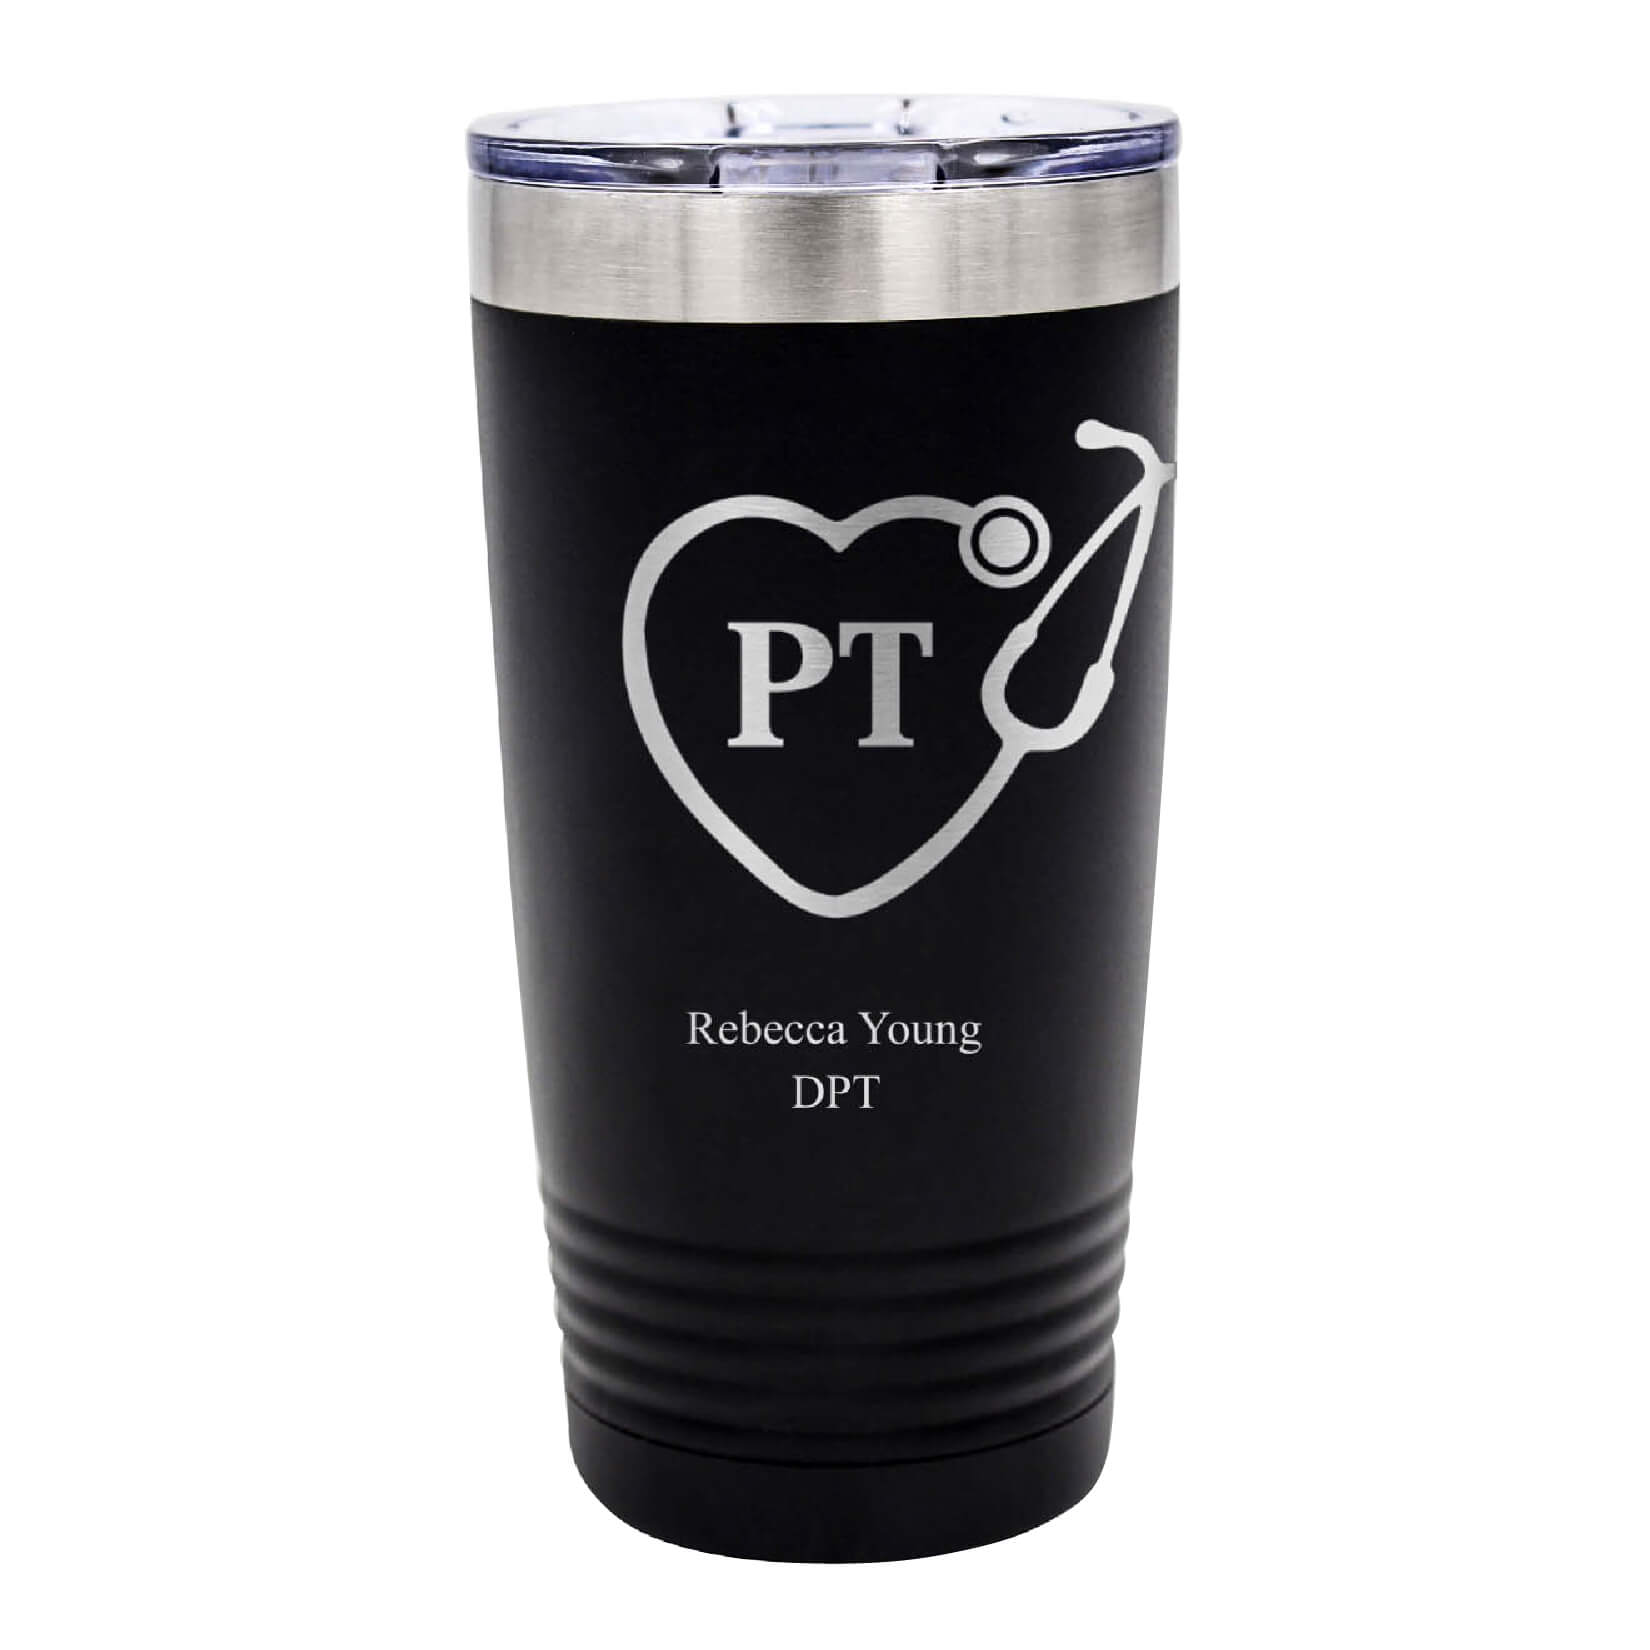 Physical Therapist Tumbler